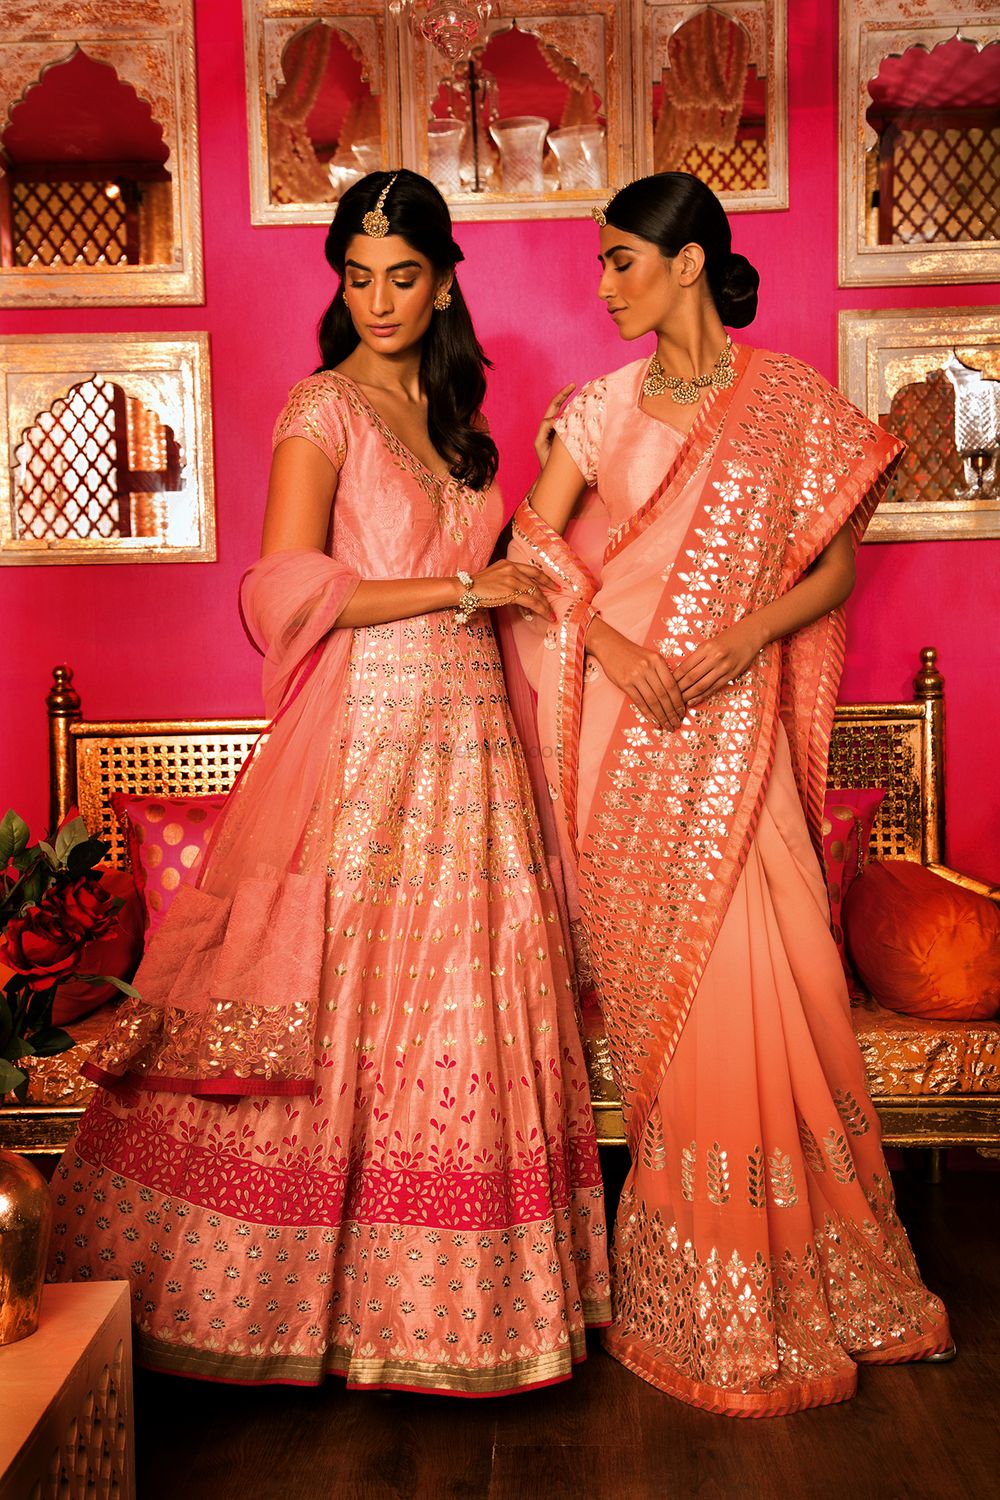 Photo of Peach and Pink Saree and Anarkali for Engagement